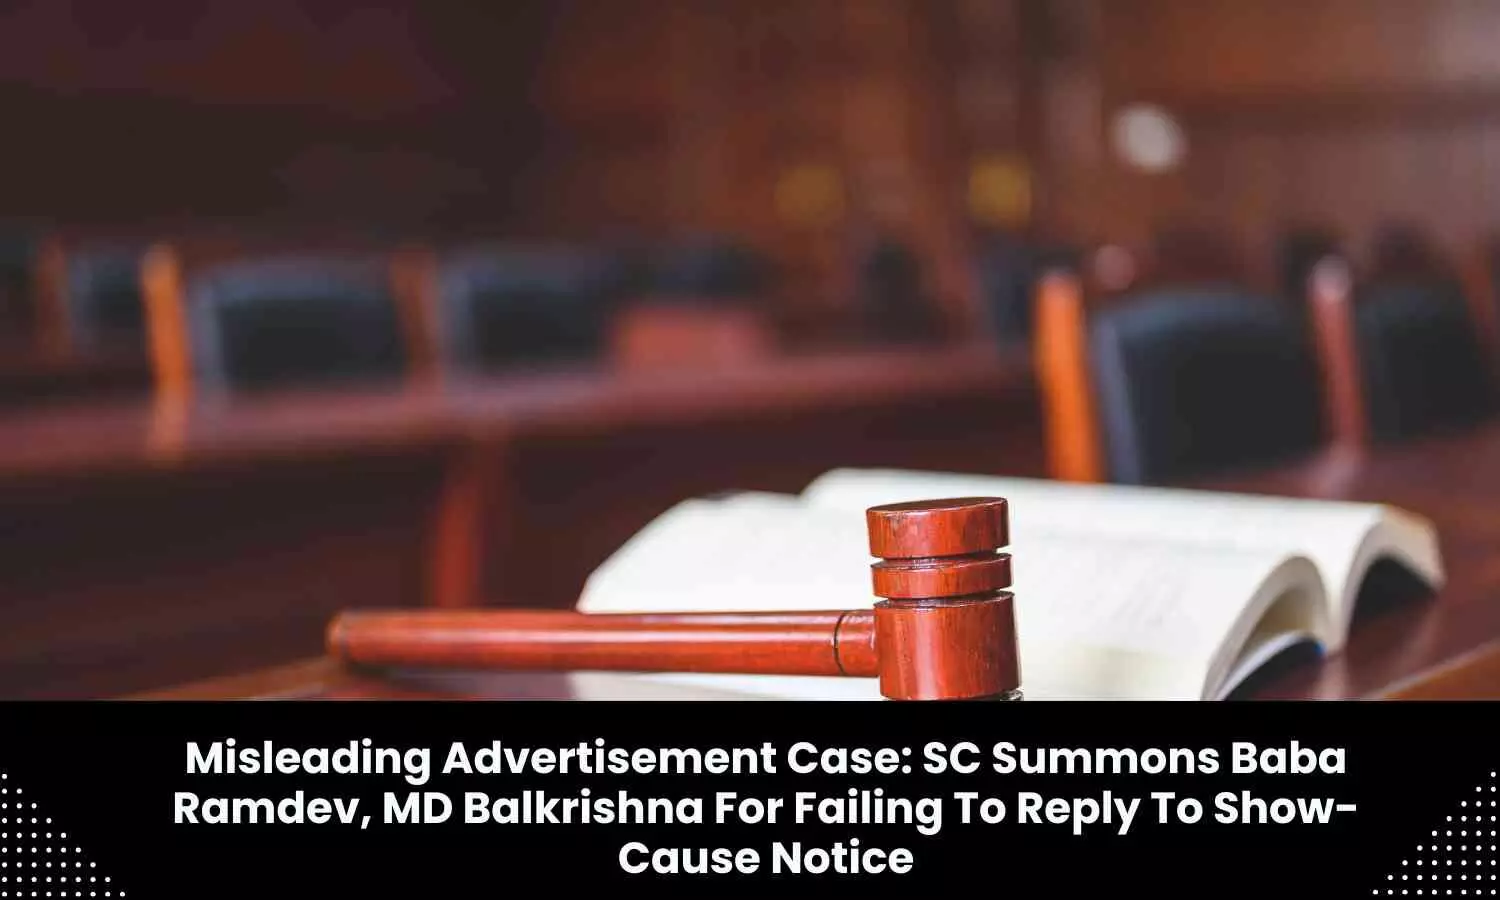 SC summons Baba Ramdev, MD Balkrishna for failing to reply to show-cause in misleading ads case